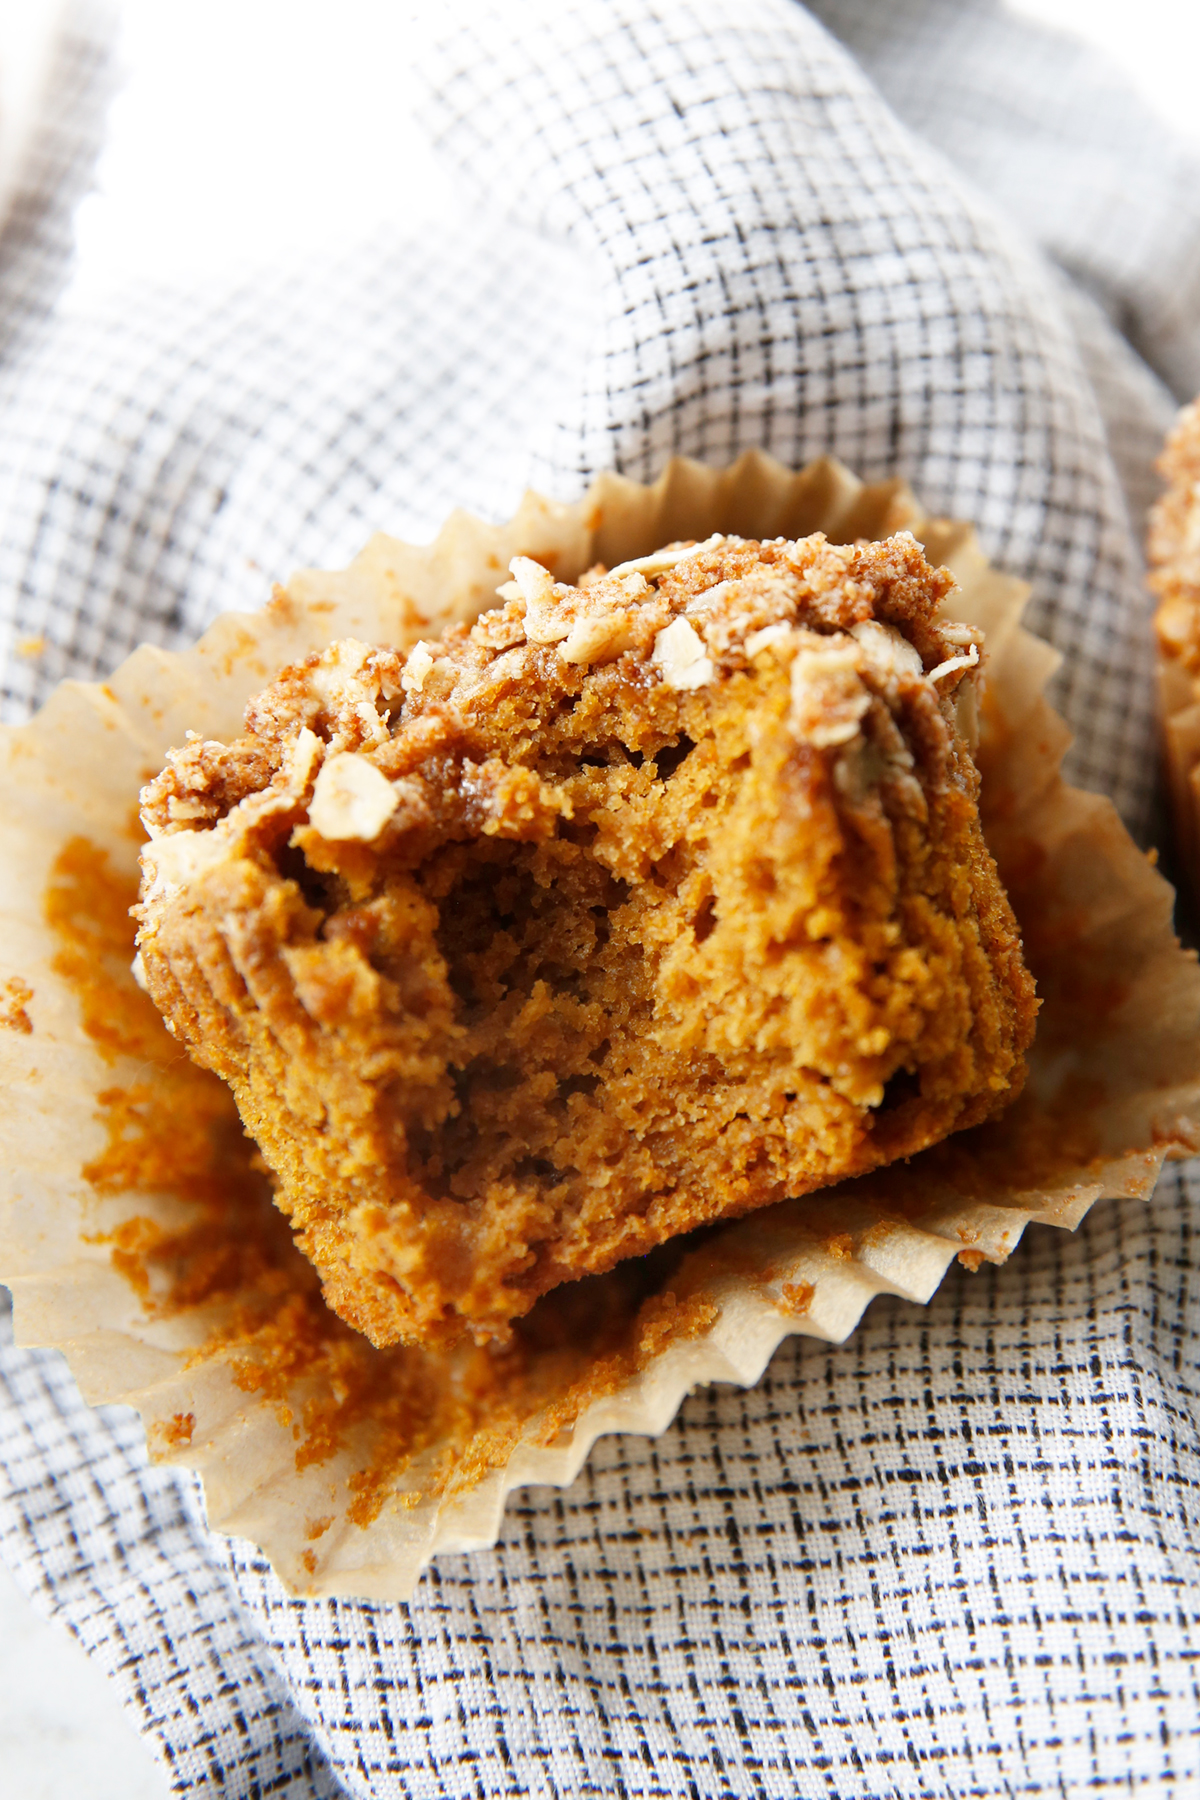 A gluten free pumpkin muffin with a bite taken out of it